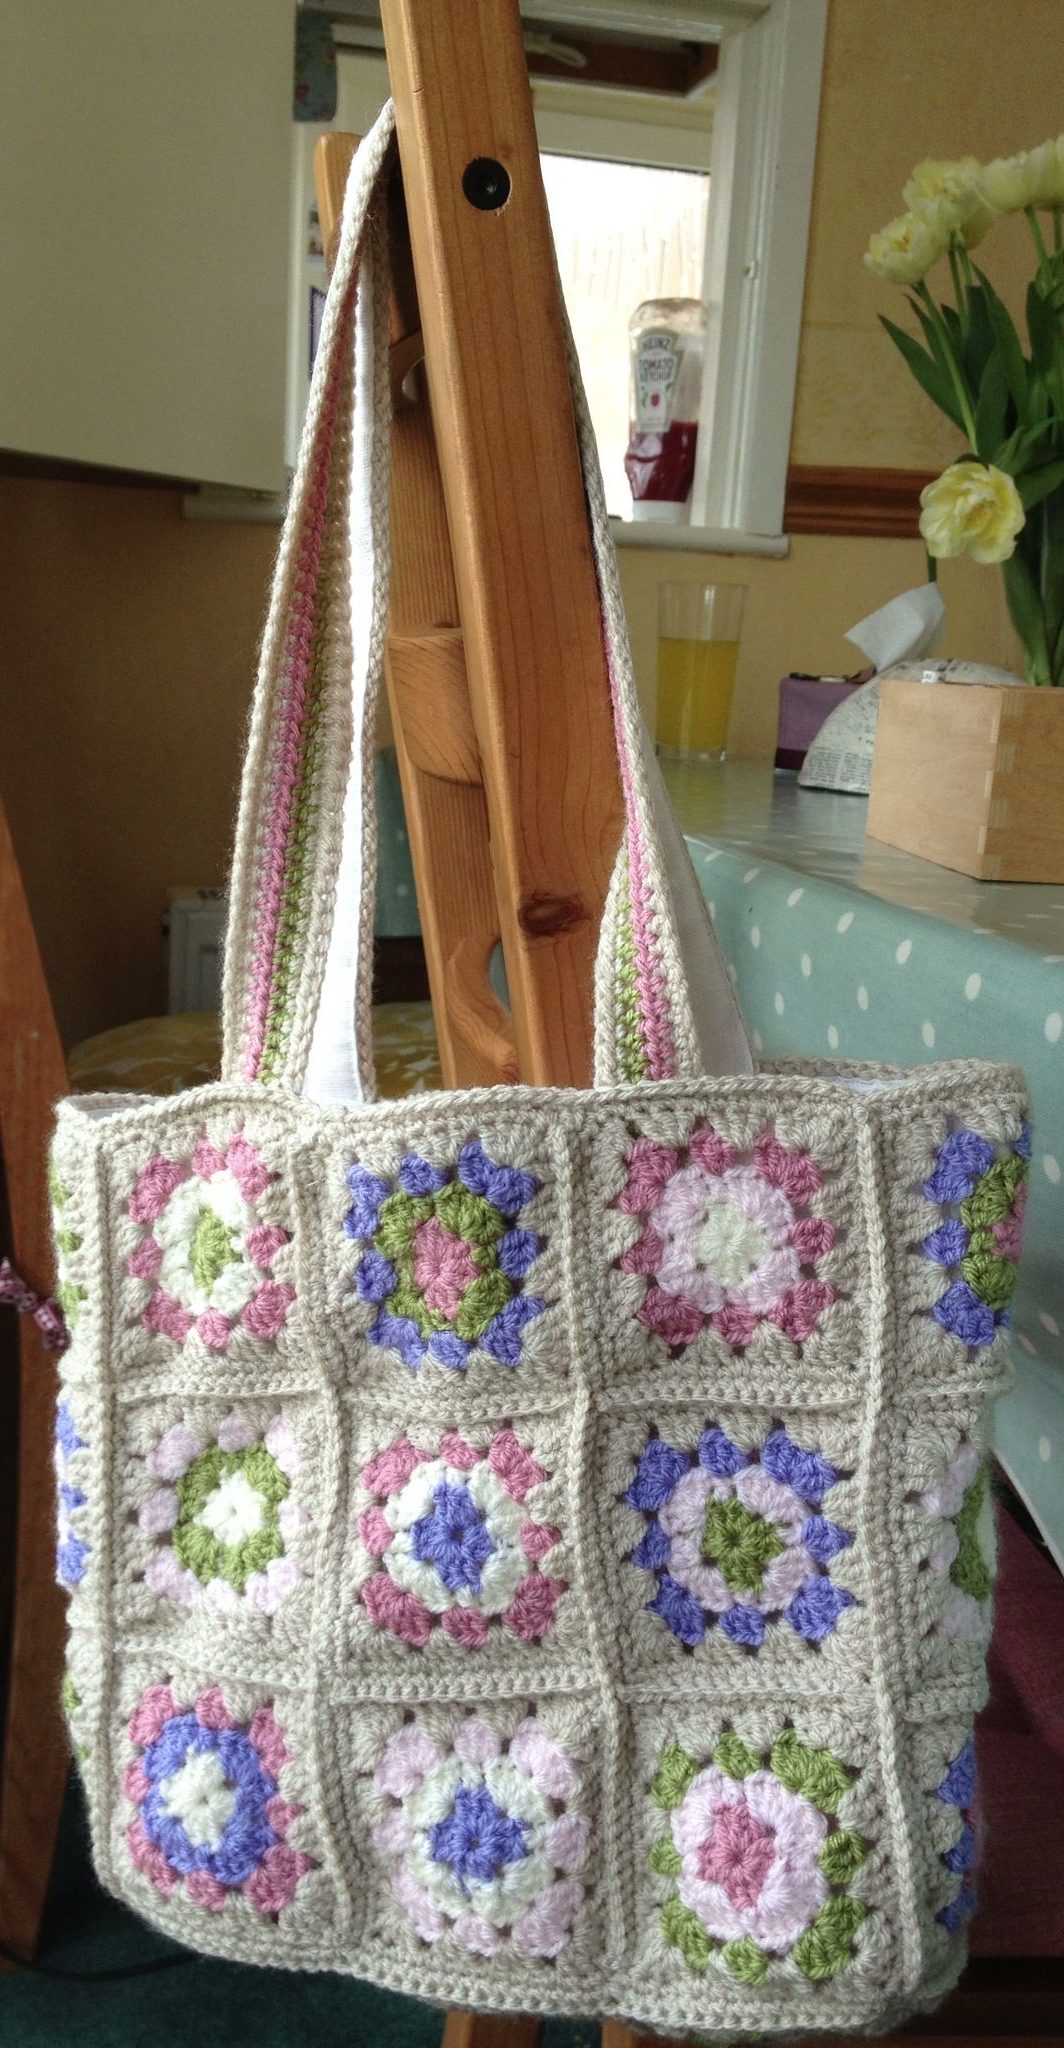 56+ Awesome Granny Square Crochet Bag Pattern Ideas - Page 4 of 56